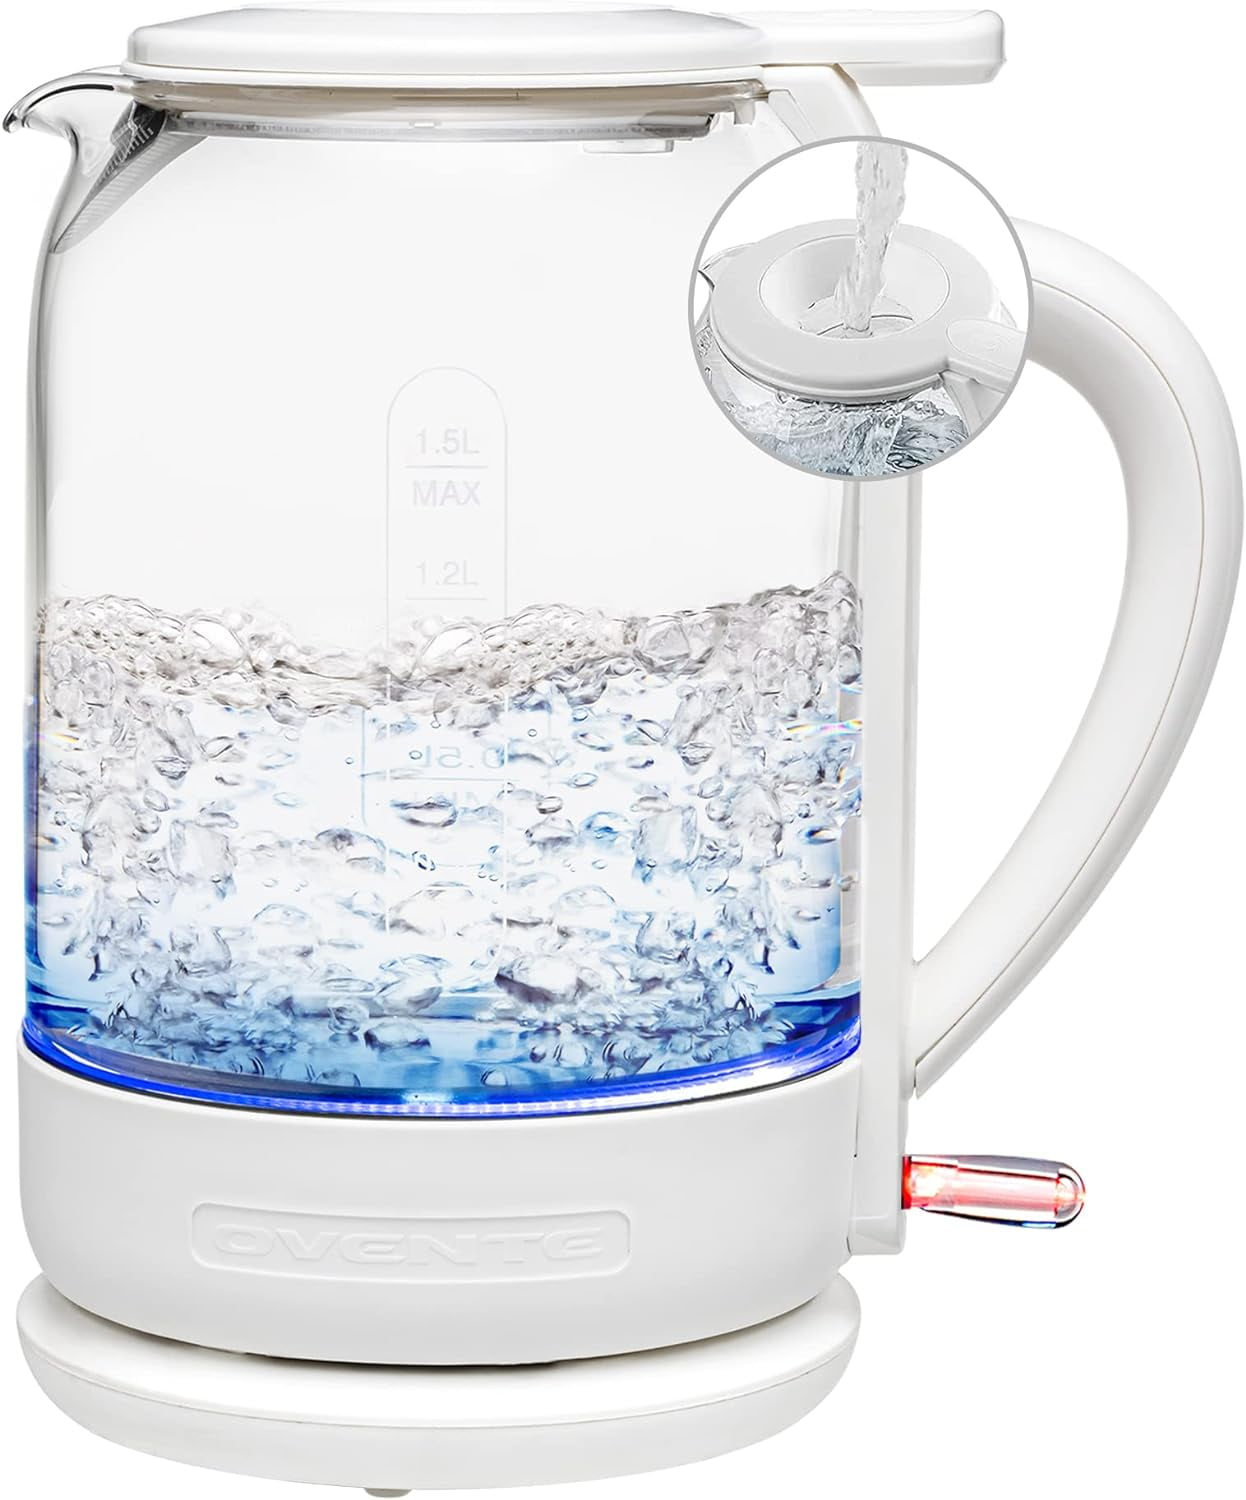 Ovente 7-Cup 1.7 l Silver Glass Electric Kettle with ProntoFill